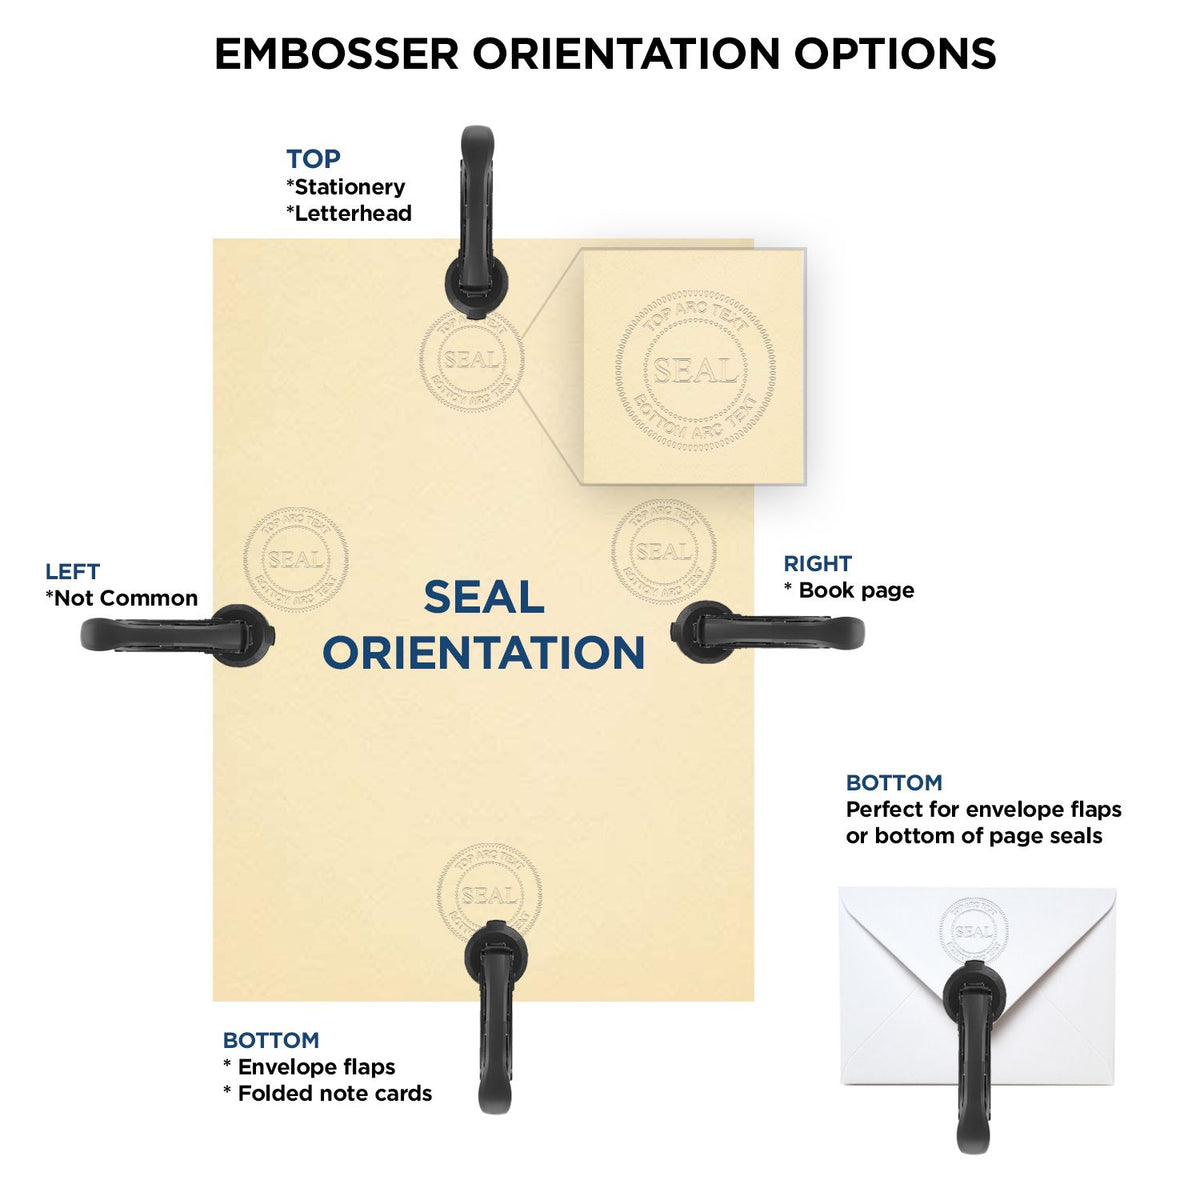 An infographic for the Handheld West Virginia Professional Engineer Embosser showing embosser orientation, this is showing examples of a top, bottom, right and left insert.